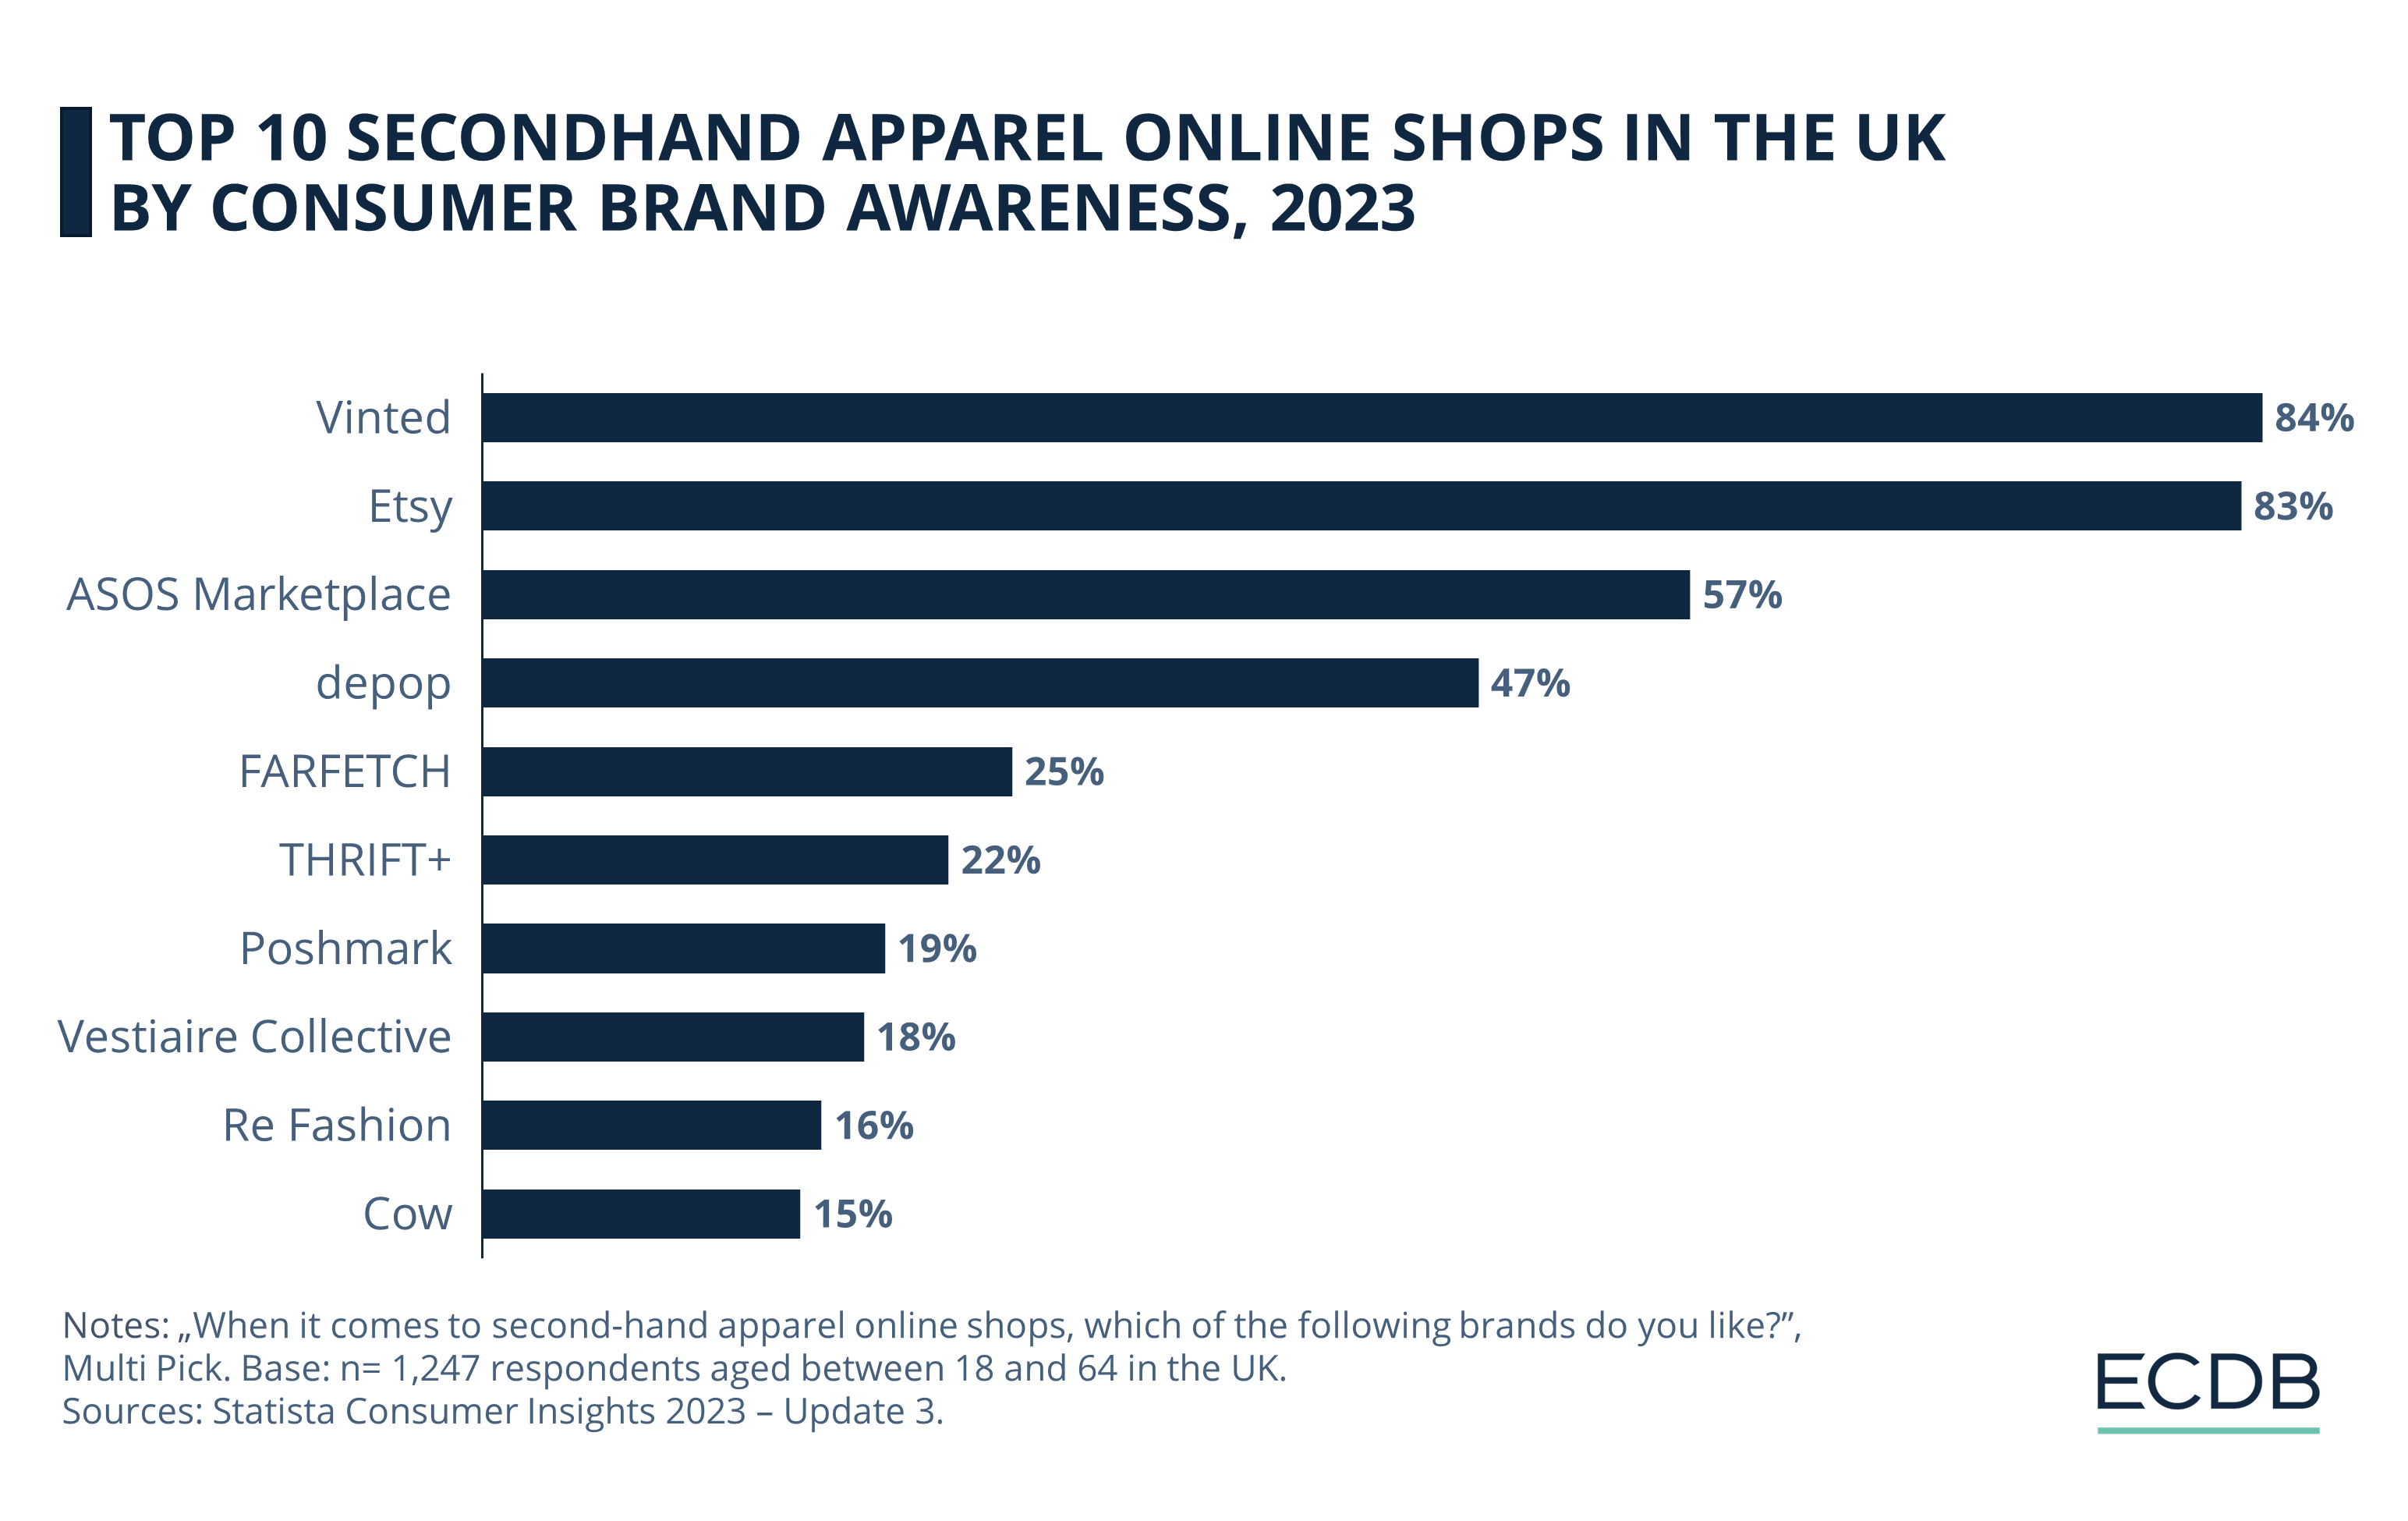 Top 10 Secondhand Apparel Online Shops in the UK by Consumer Brand Awareness, 2023